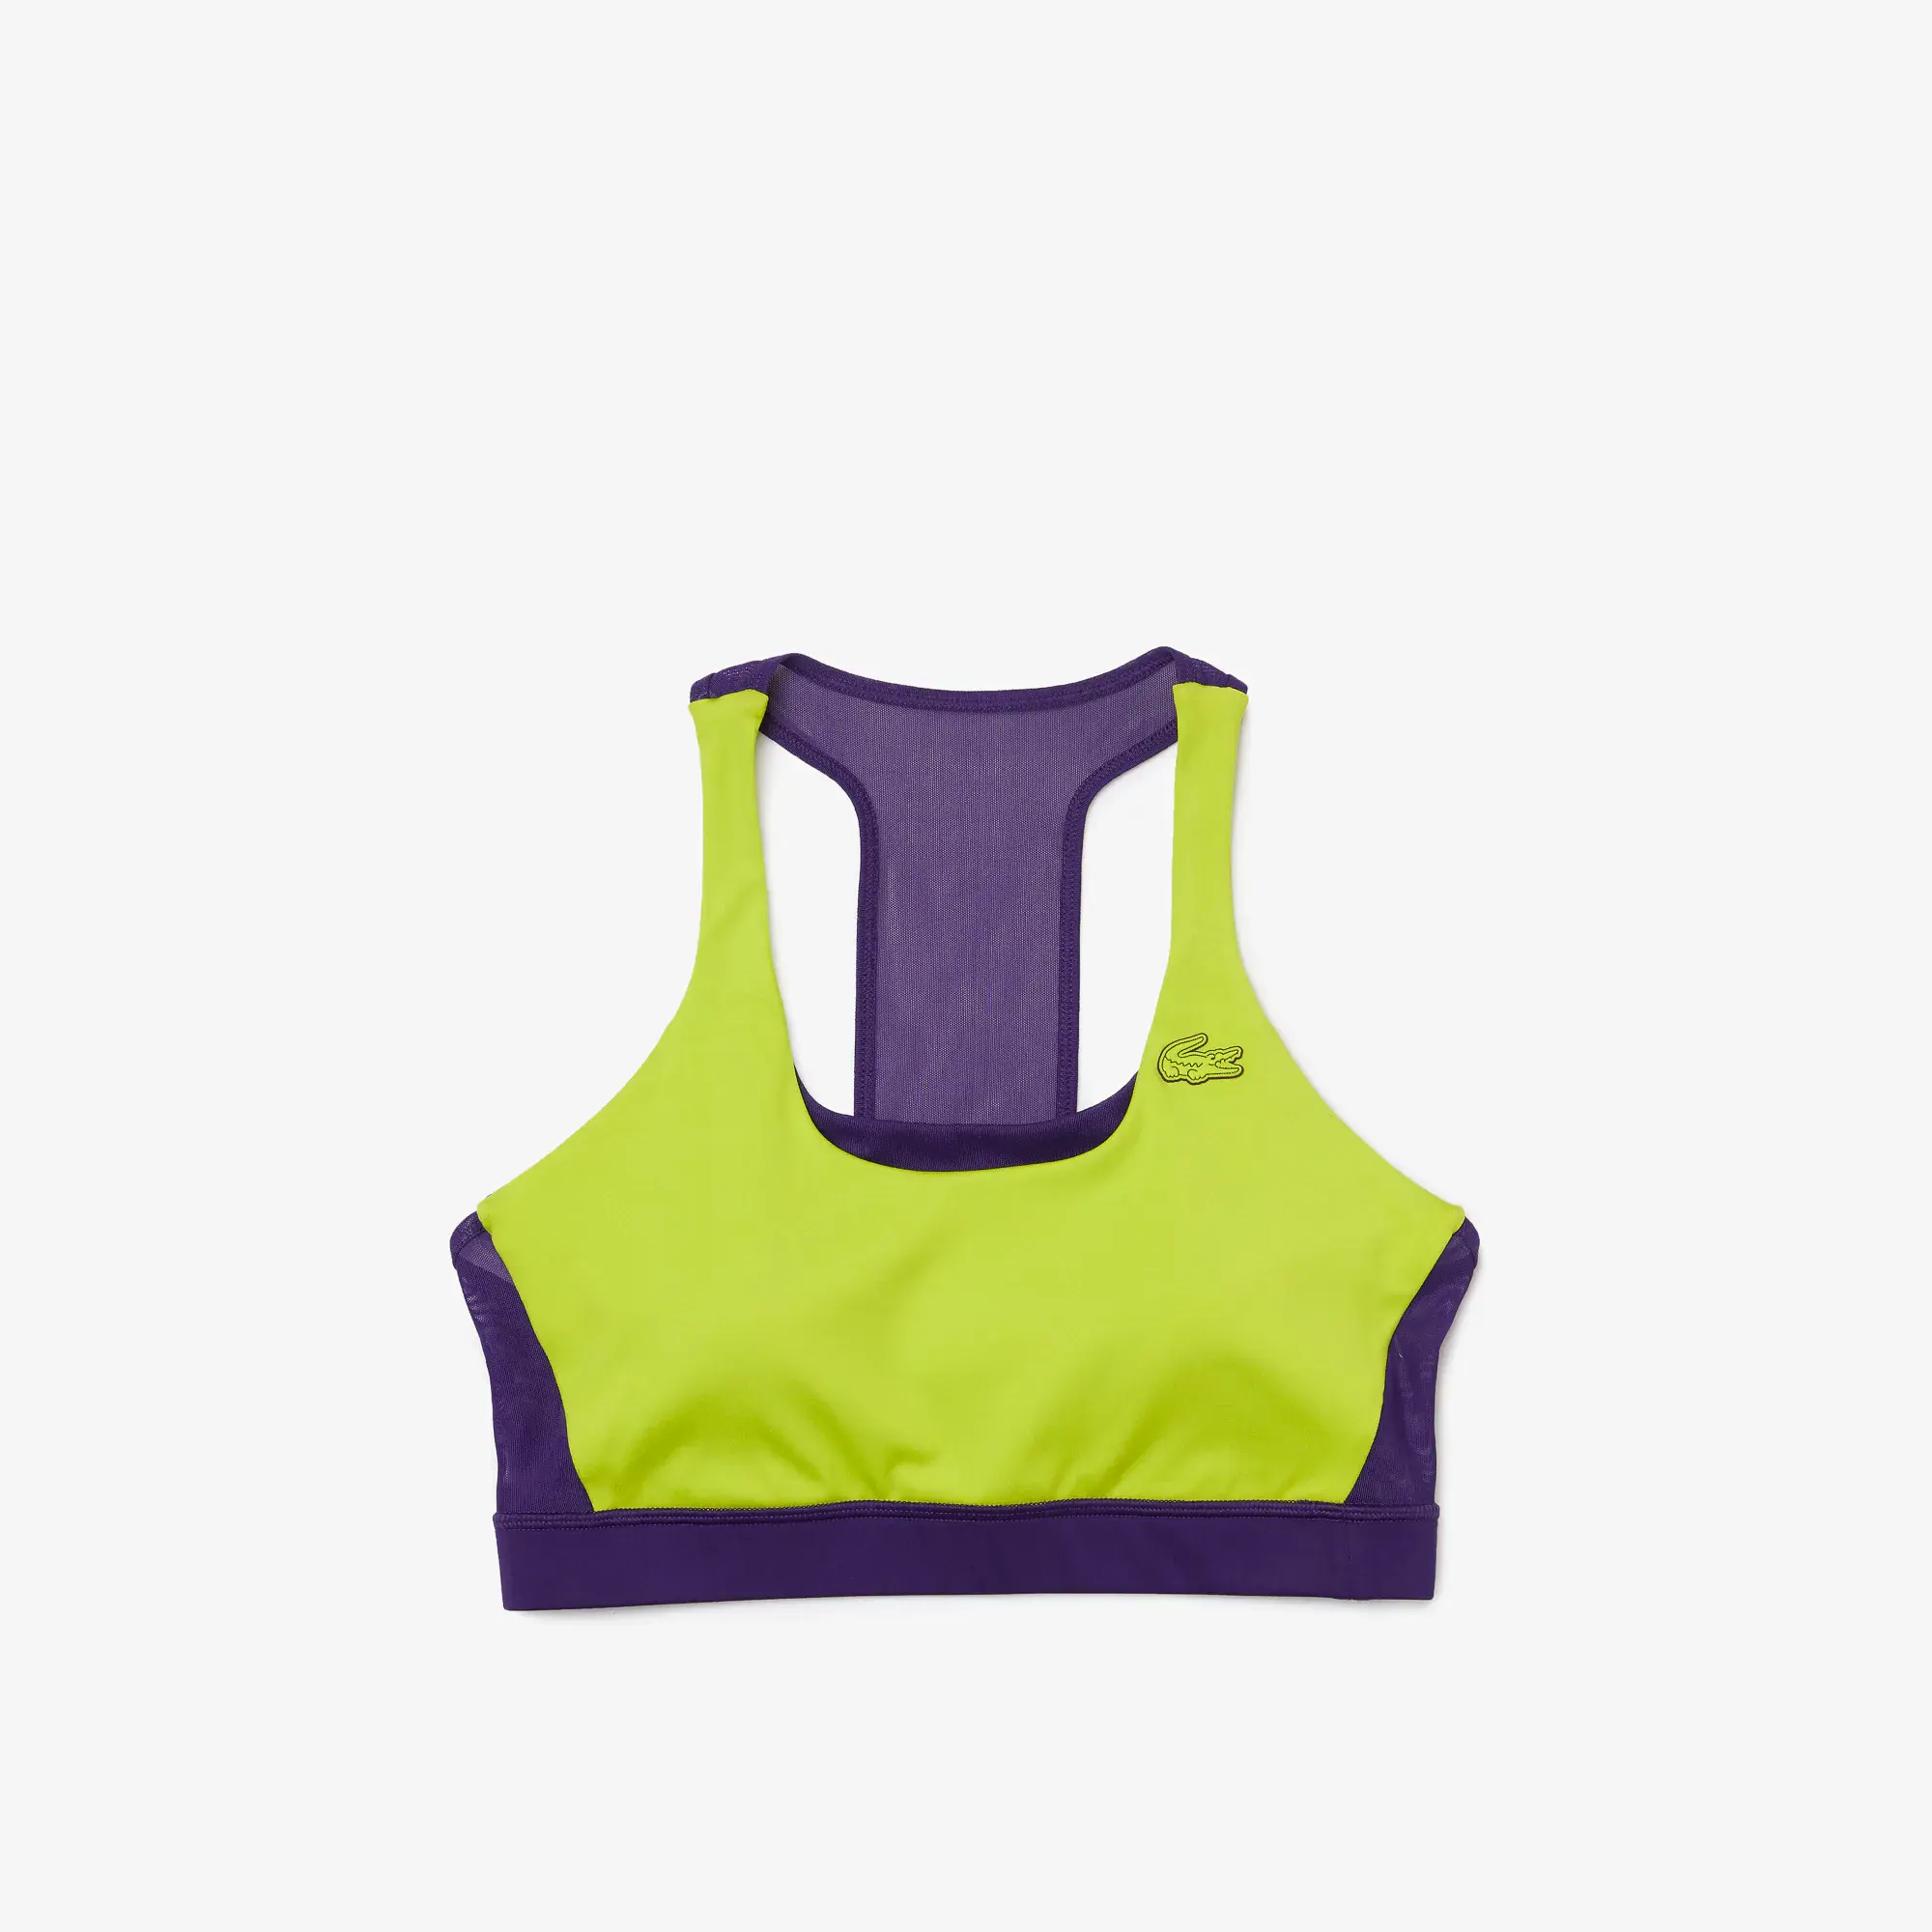 Lacoste Women's SPORT Colorblock Recycled Polyester Sports Bra. 2